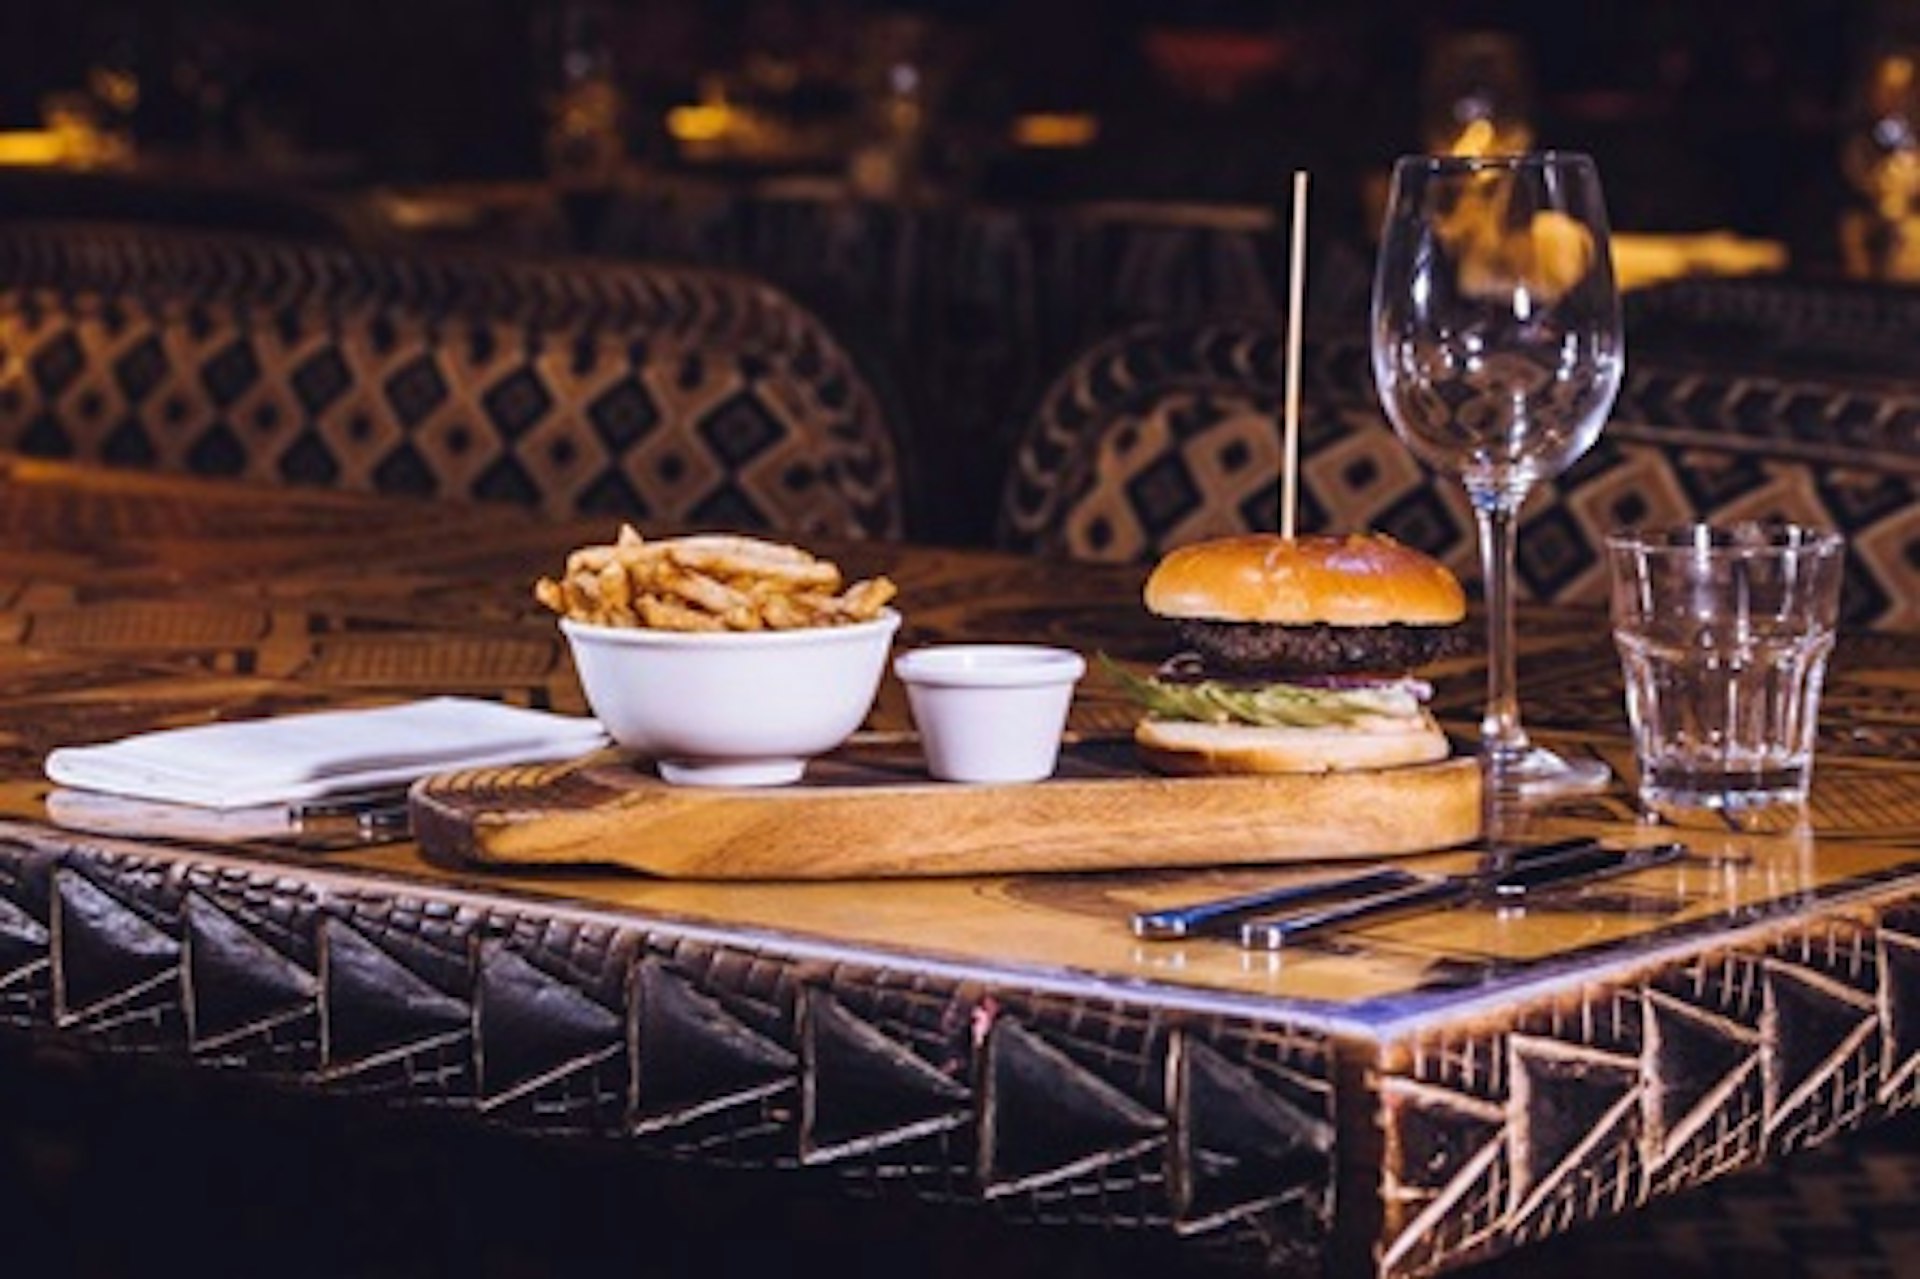 Burger, Fries and Cocktail for Two at London's Shaka Zulu 1